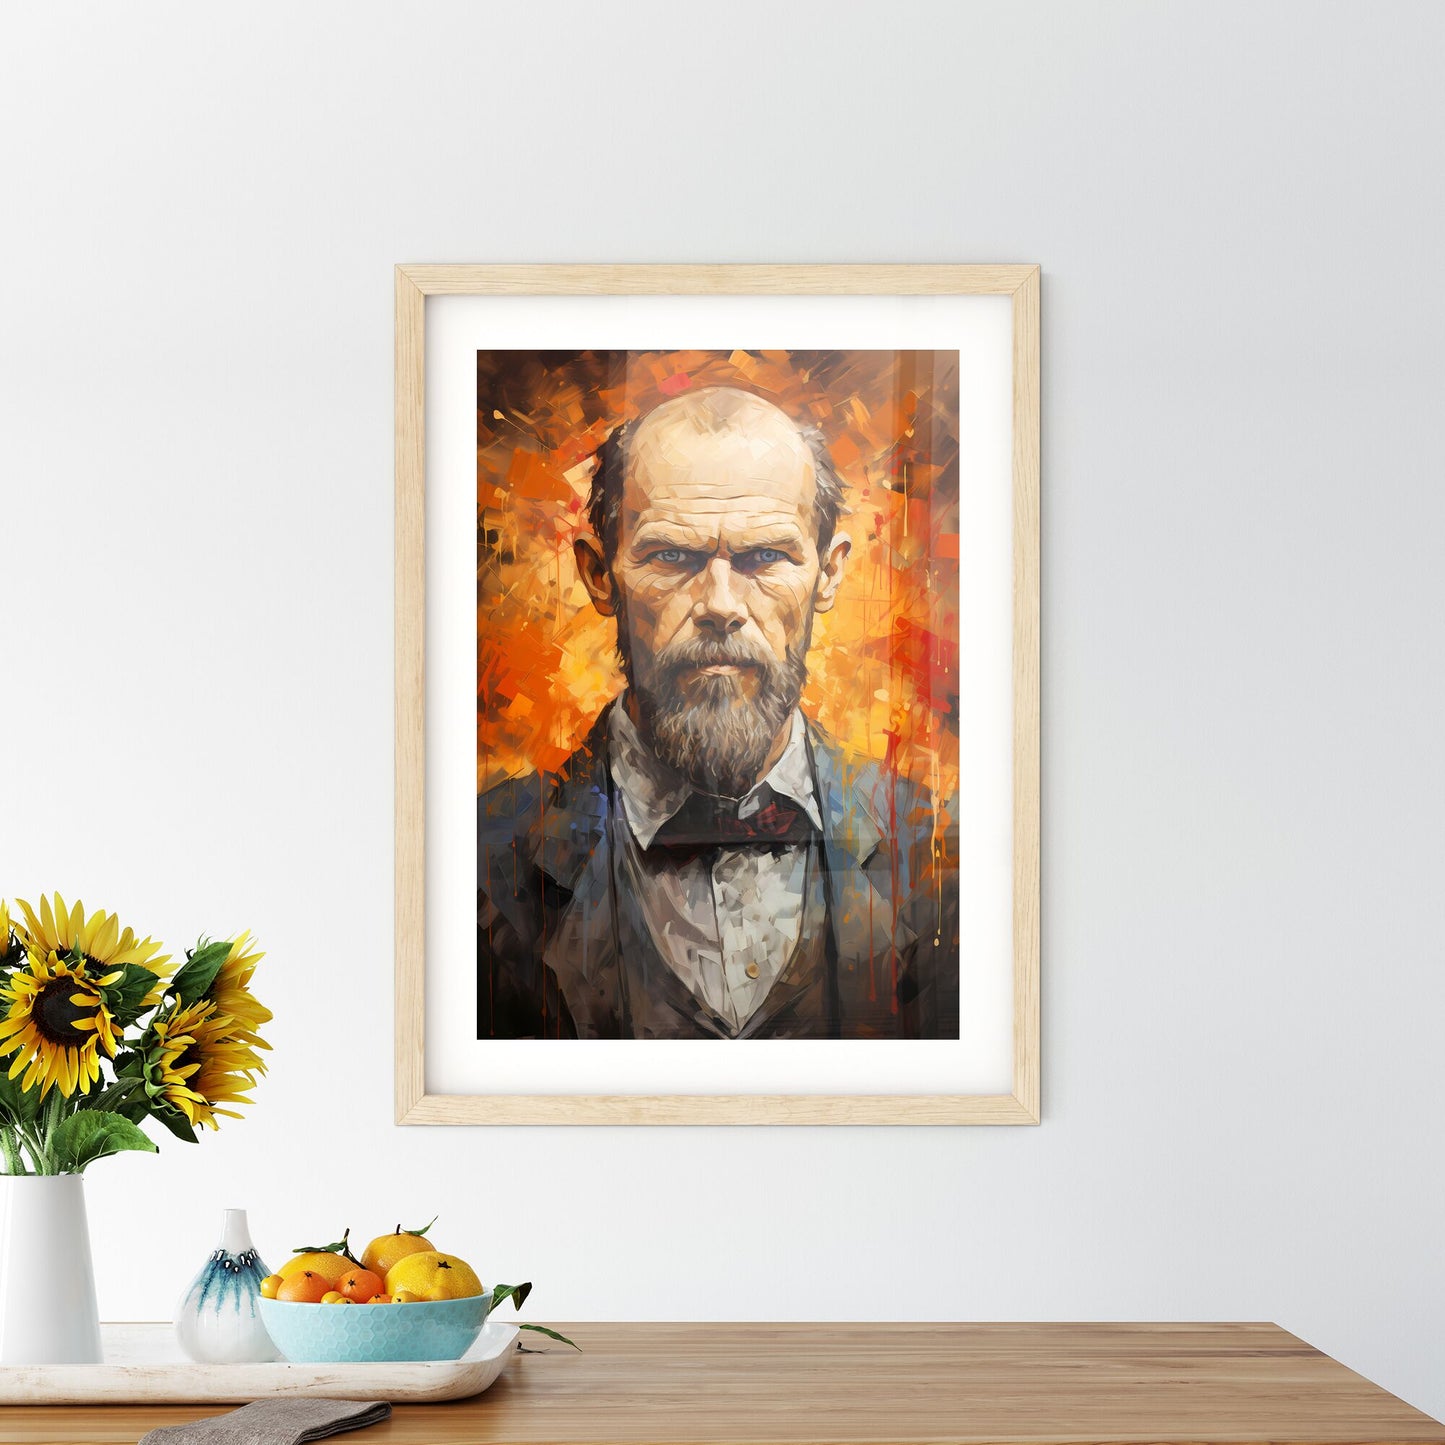 Fyodor Dostoevsky - A Painting Of A Man With A Beard Default Title